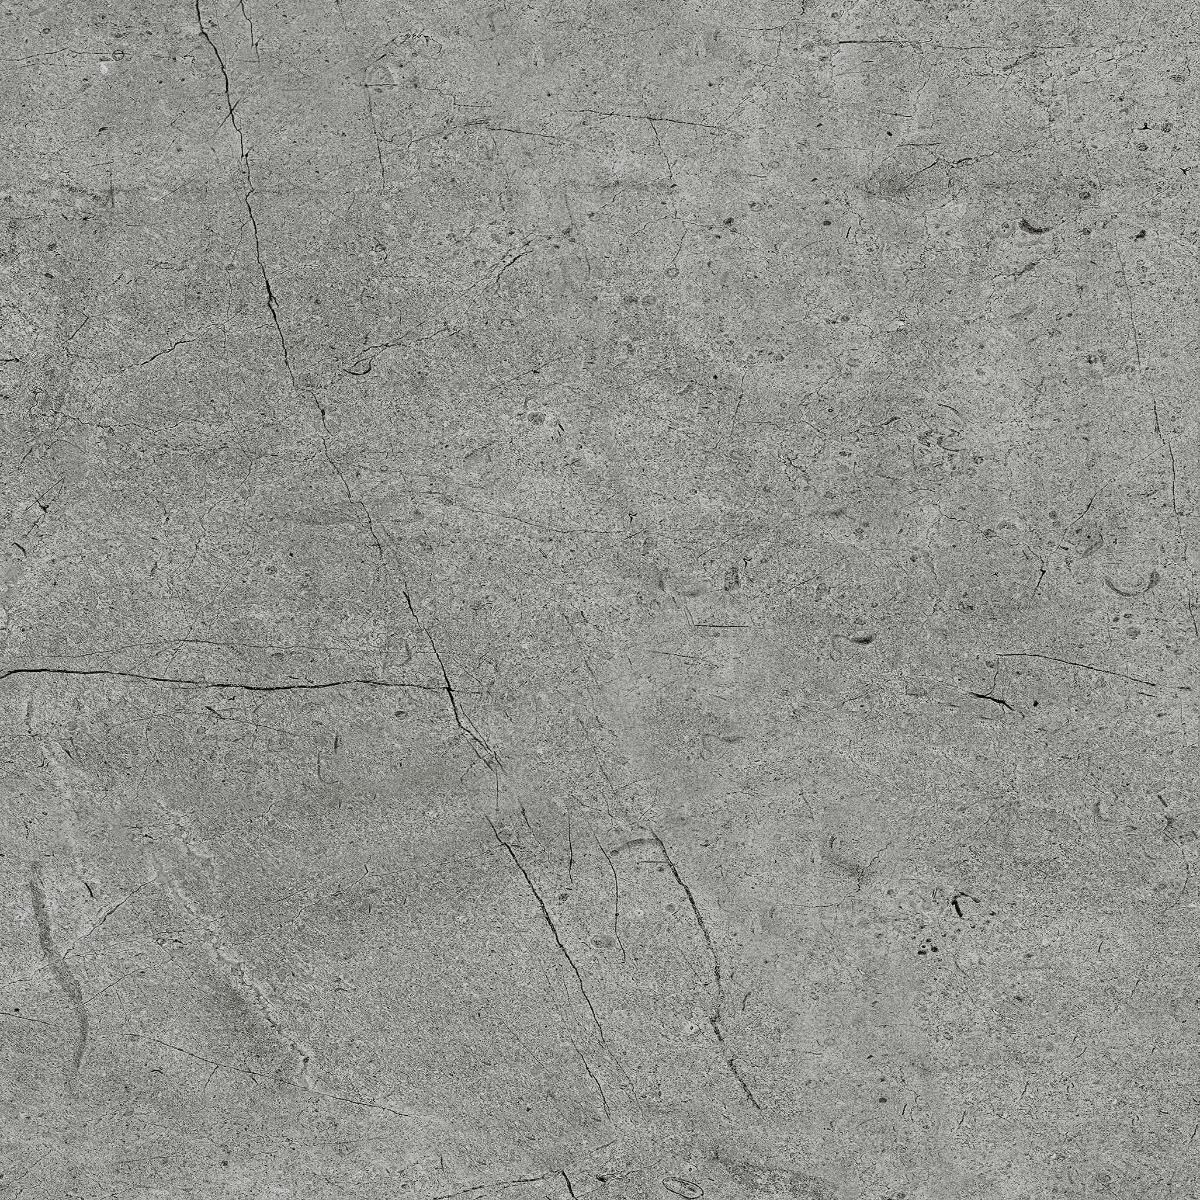 Grey Marble Tiles for Bathroom Tiles, Living Room Tiles, Bedroom Tiles, Accent Tiles, Hospital Tiles, High Traffic Tiles, Bar/Restaurant, Commercial/Office, Outdoor Area, School & Collages